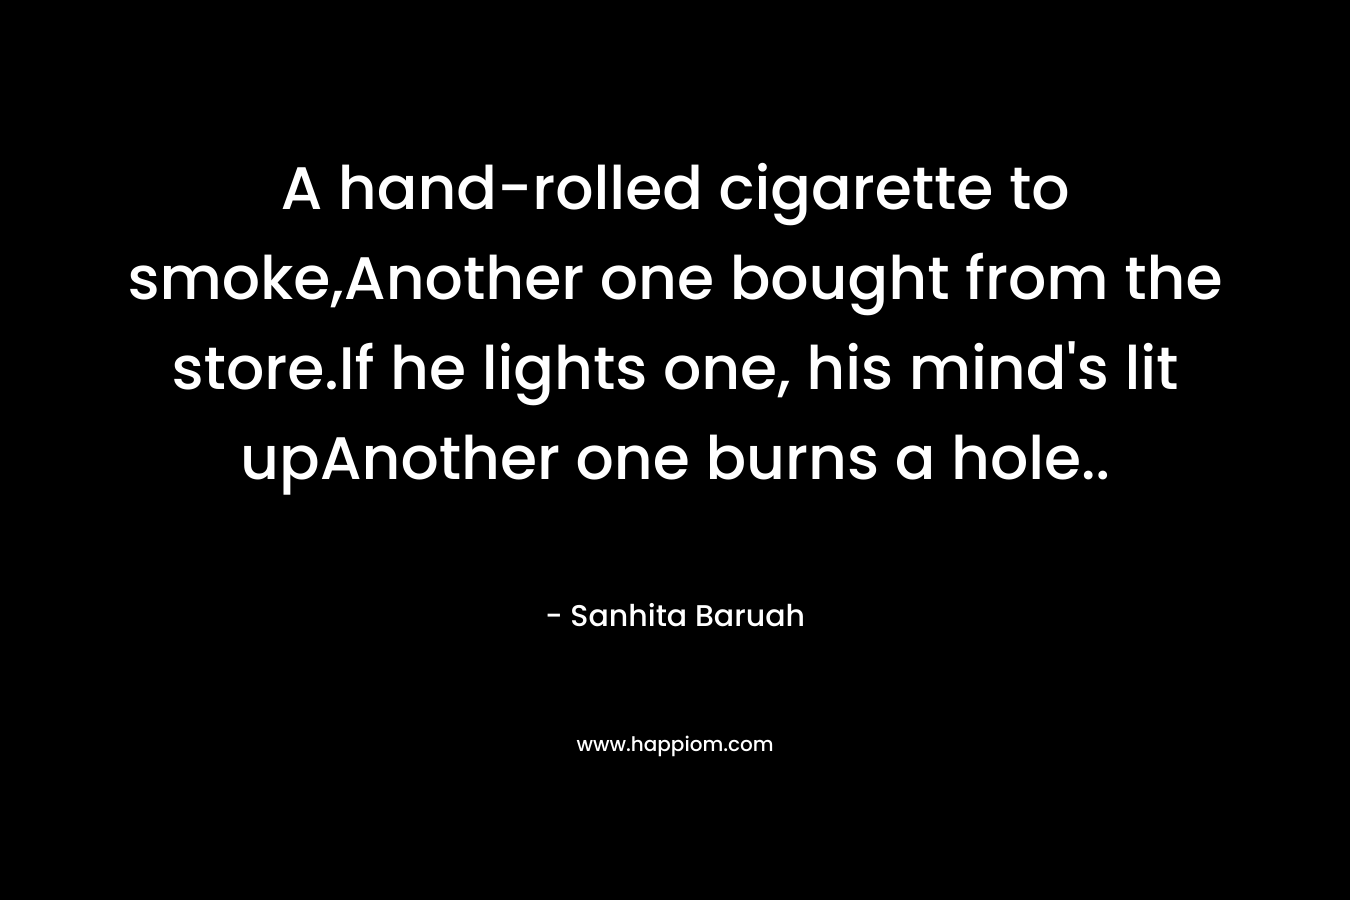 A hand-rolled cigarette to smoke,Another one bought from the store.If he lights one, his mind's lit upAnother one burns a hole..